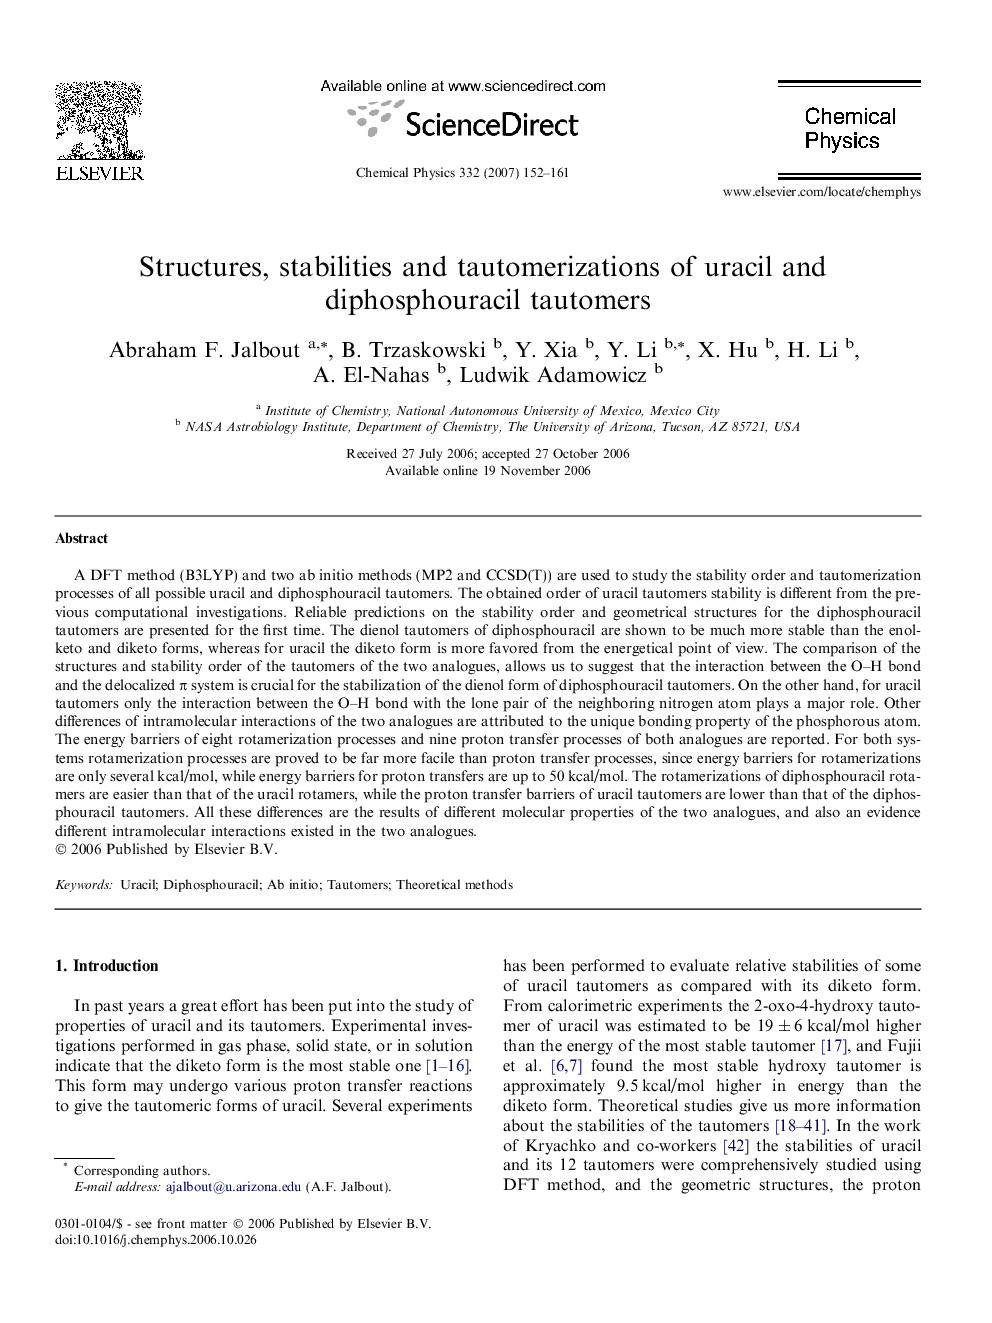 Structures, stabilities and tautomerizations of uracil and diphosphouracil tautomers